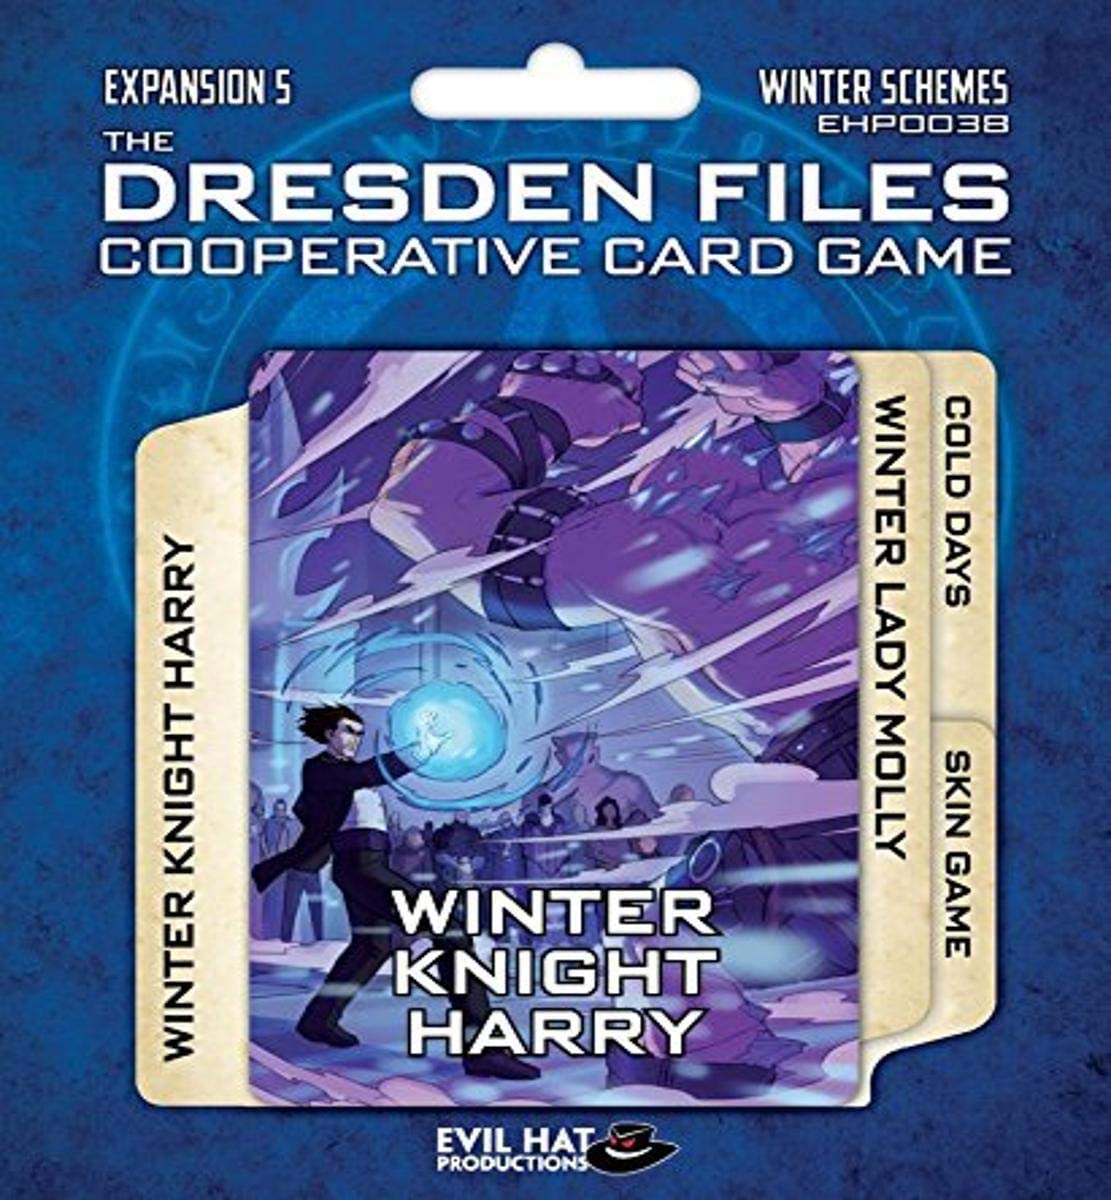 Evil Hat Productions Dresden Files Cooperative Card Game: Winter Schemes